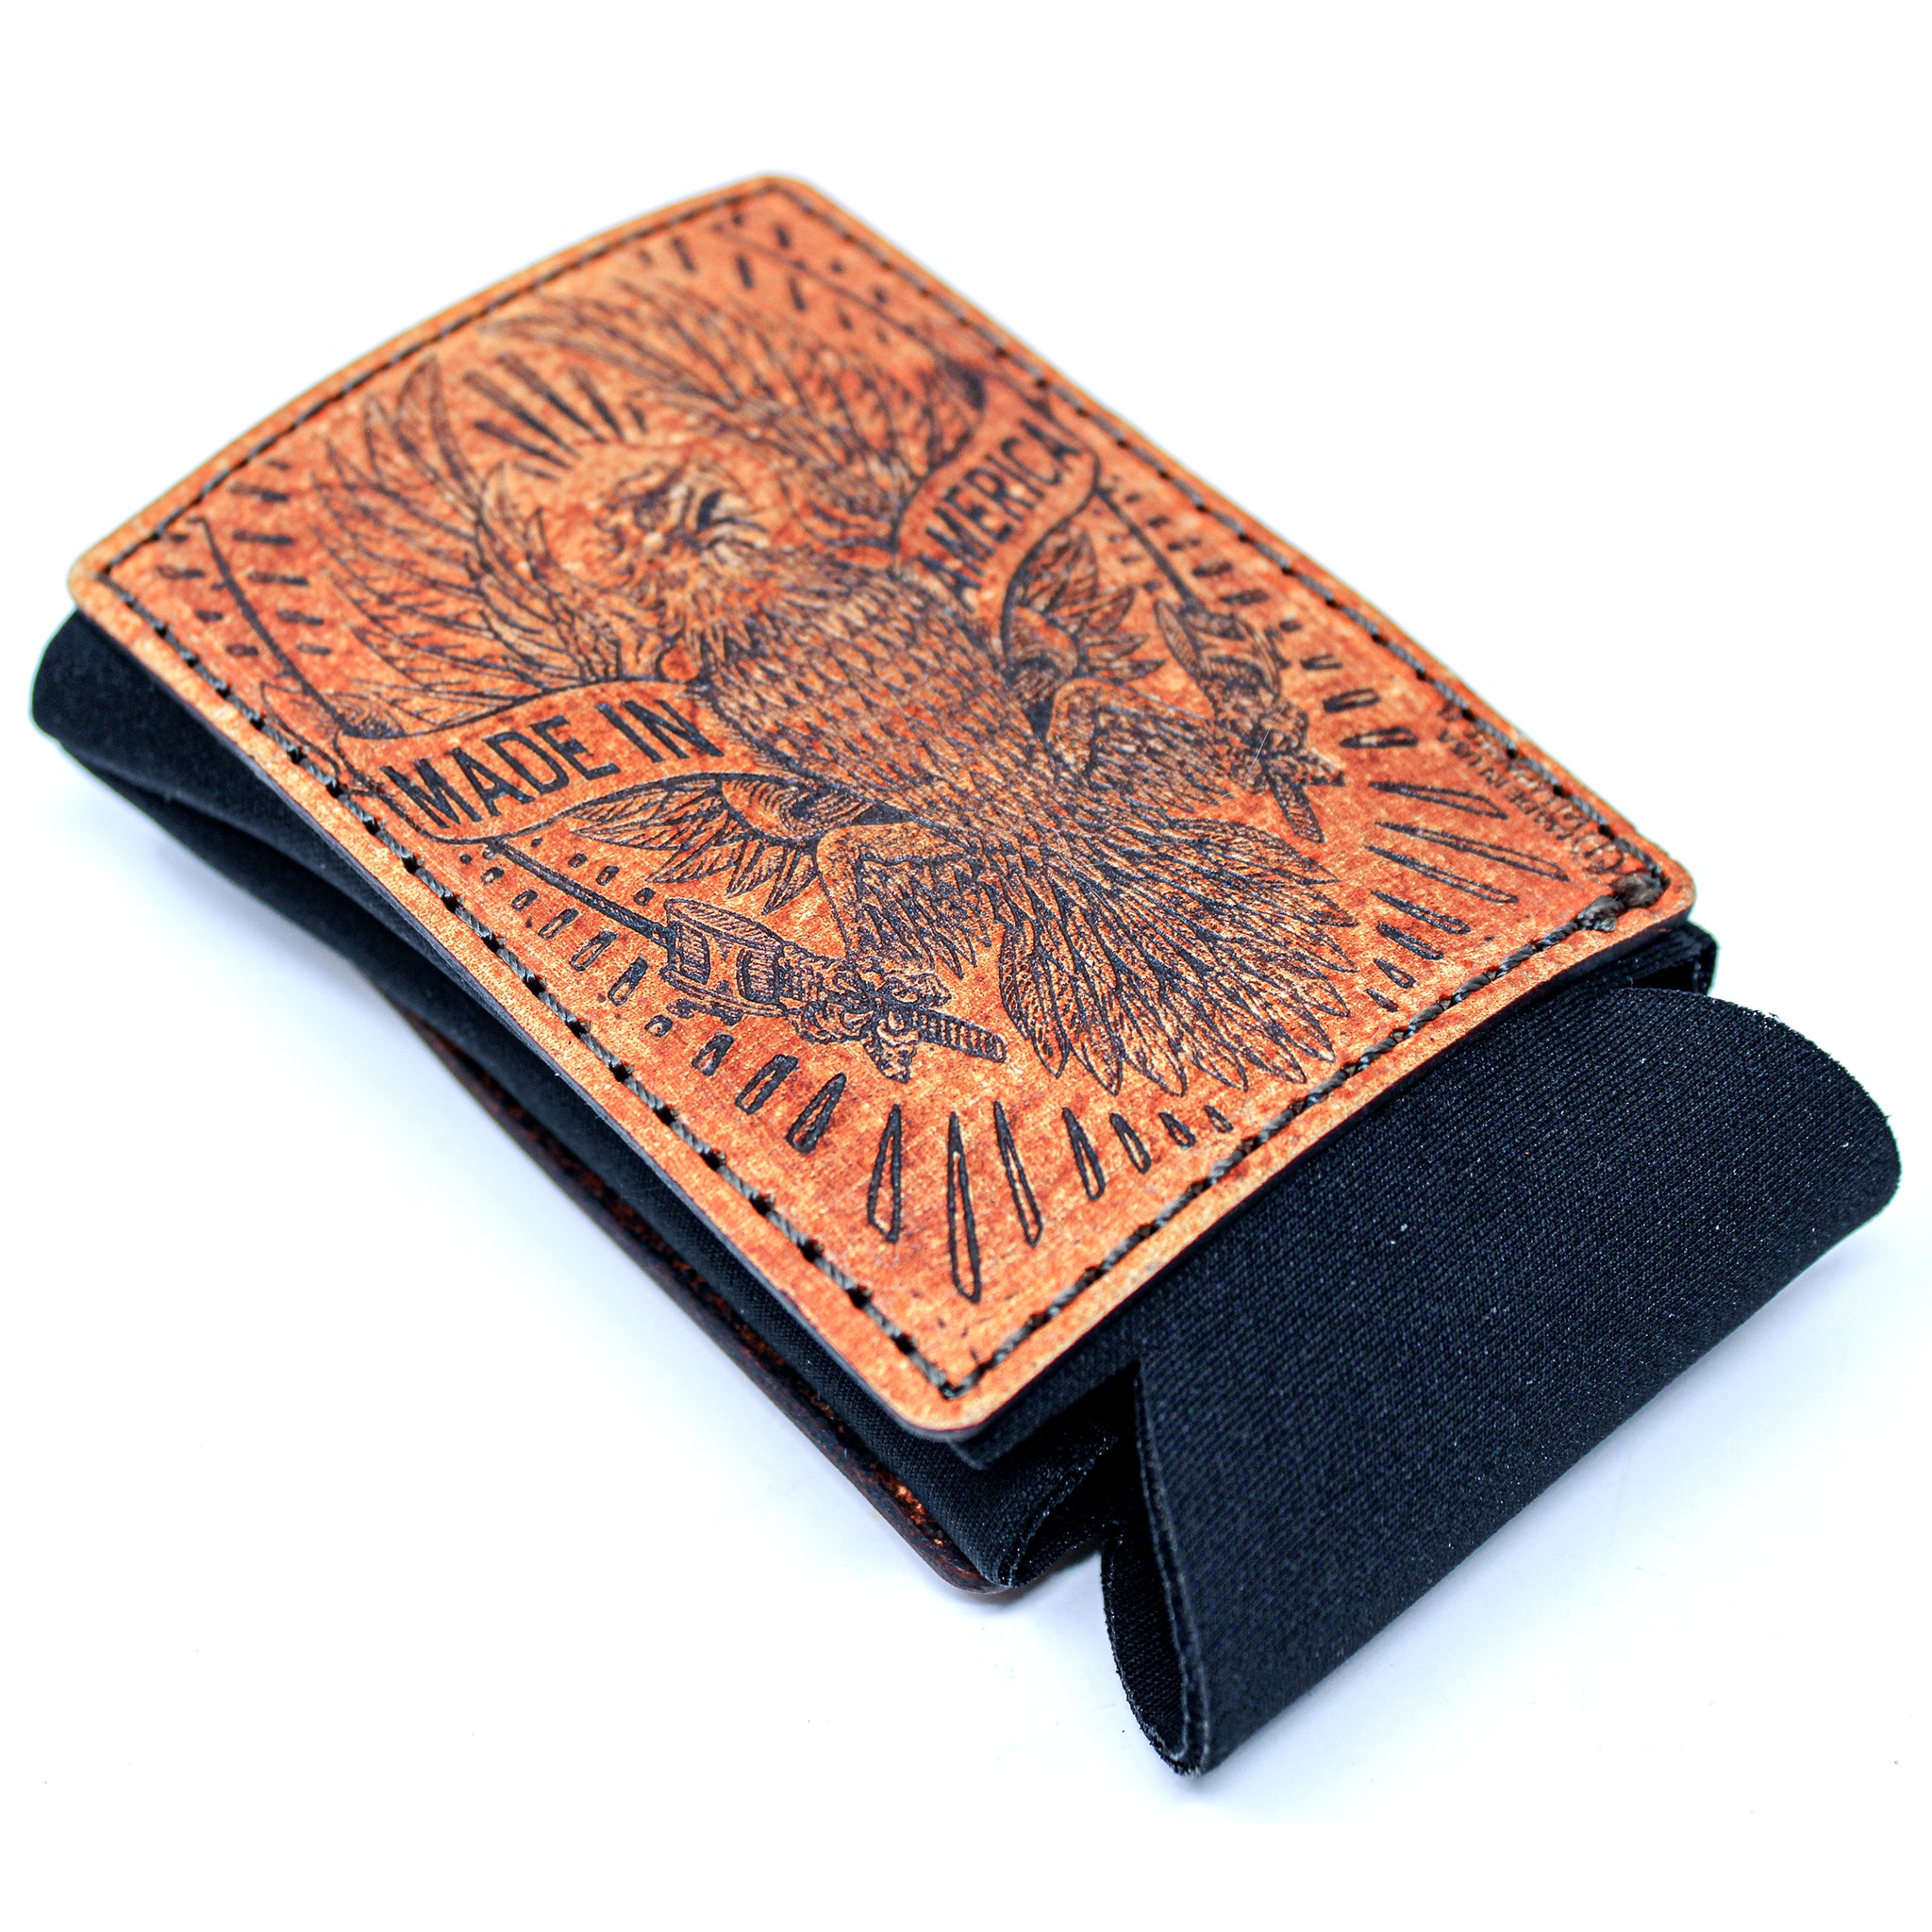 Leather Patch Drink Sleeve - American Made Eagle